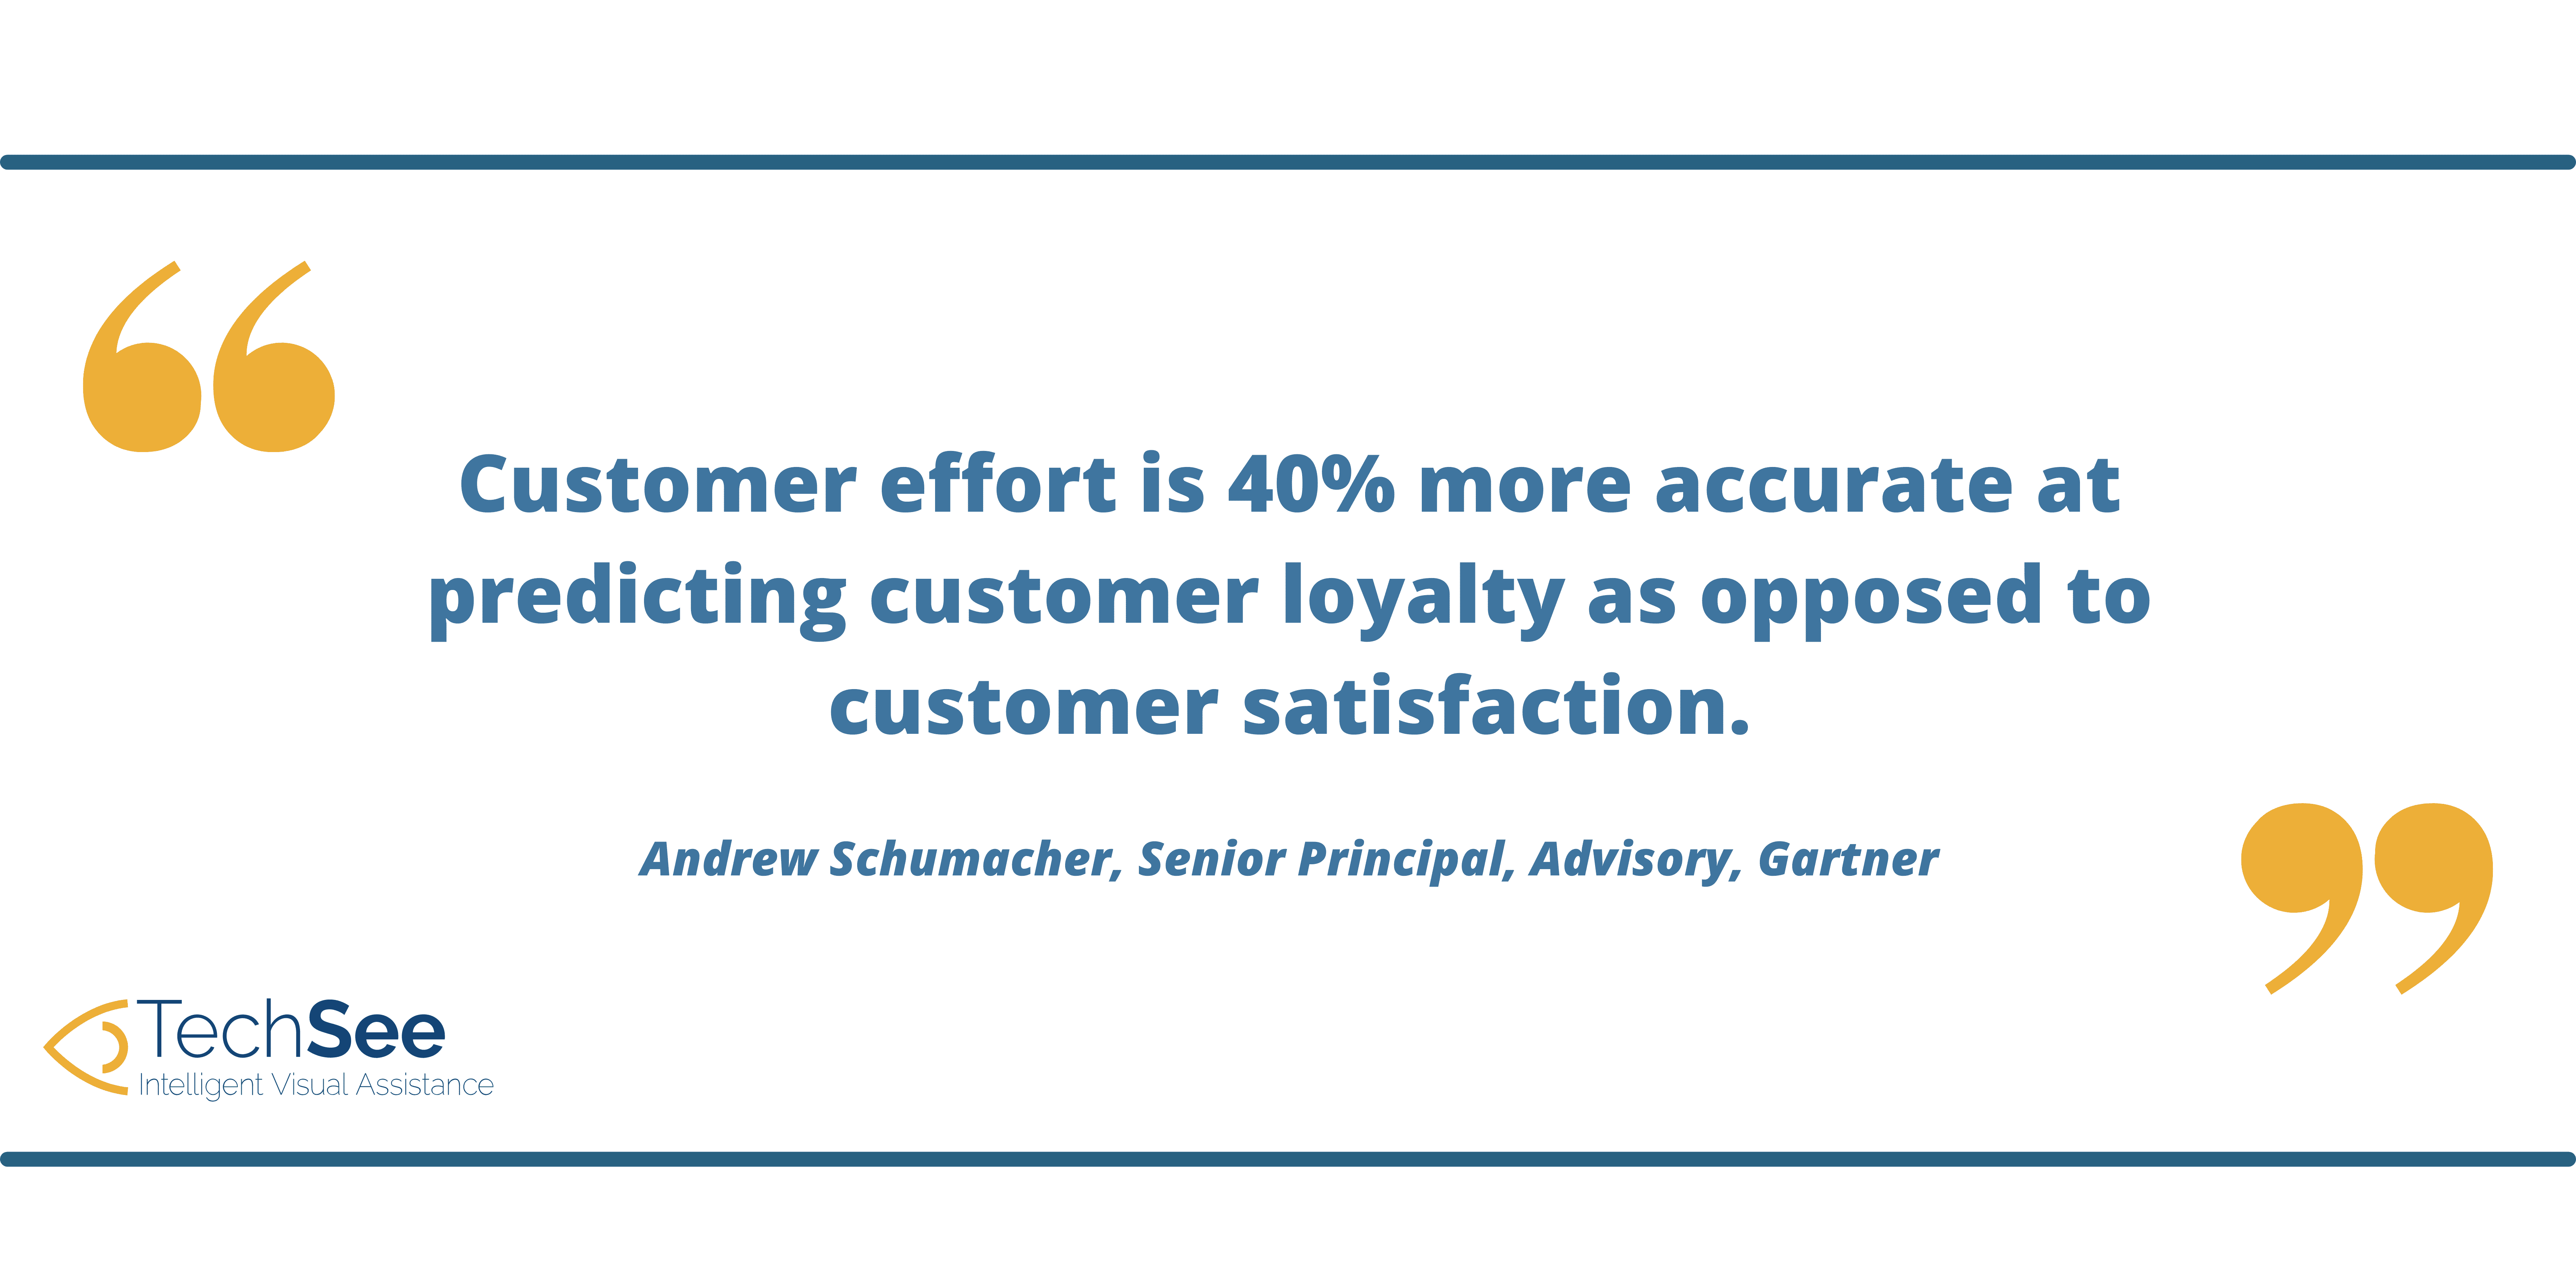 TechSee quotes from Andrew Schumacher why an effortless customer experience is vital.